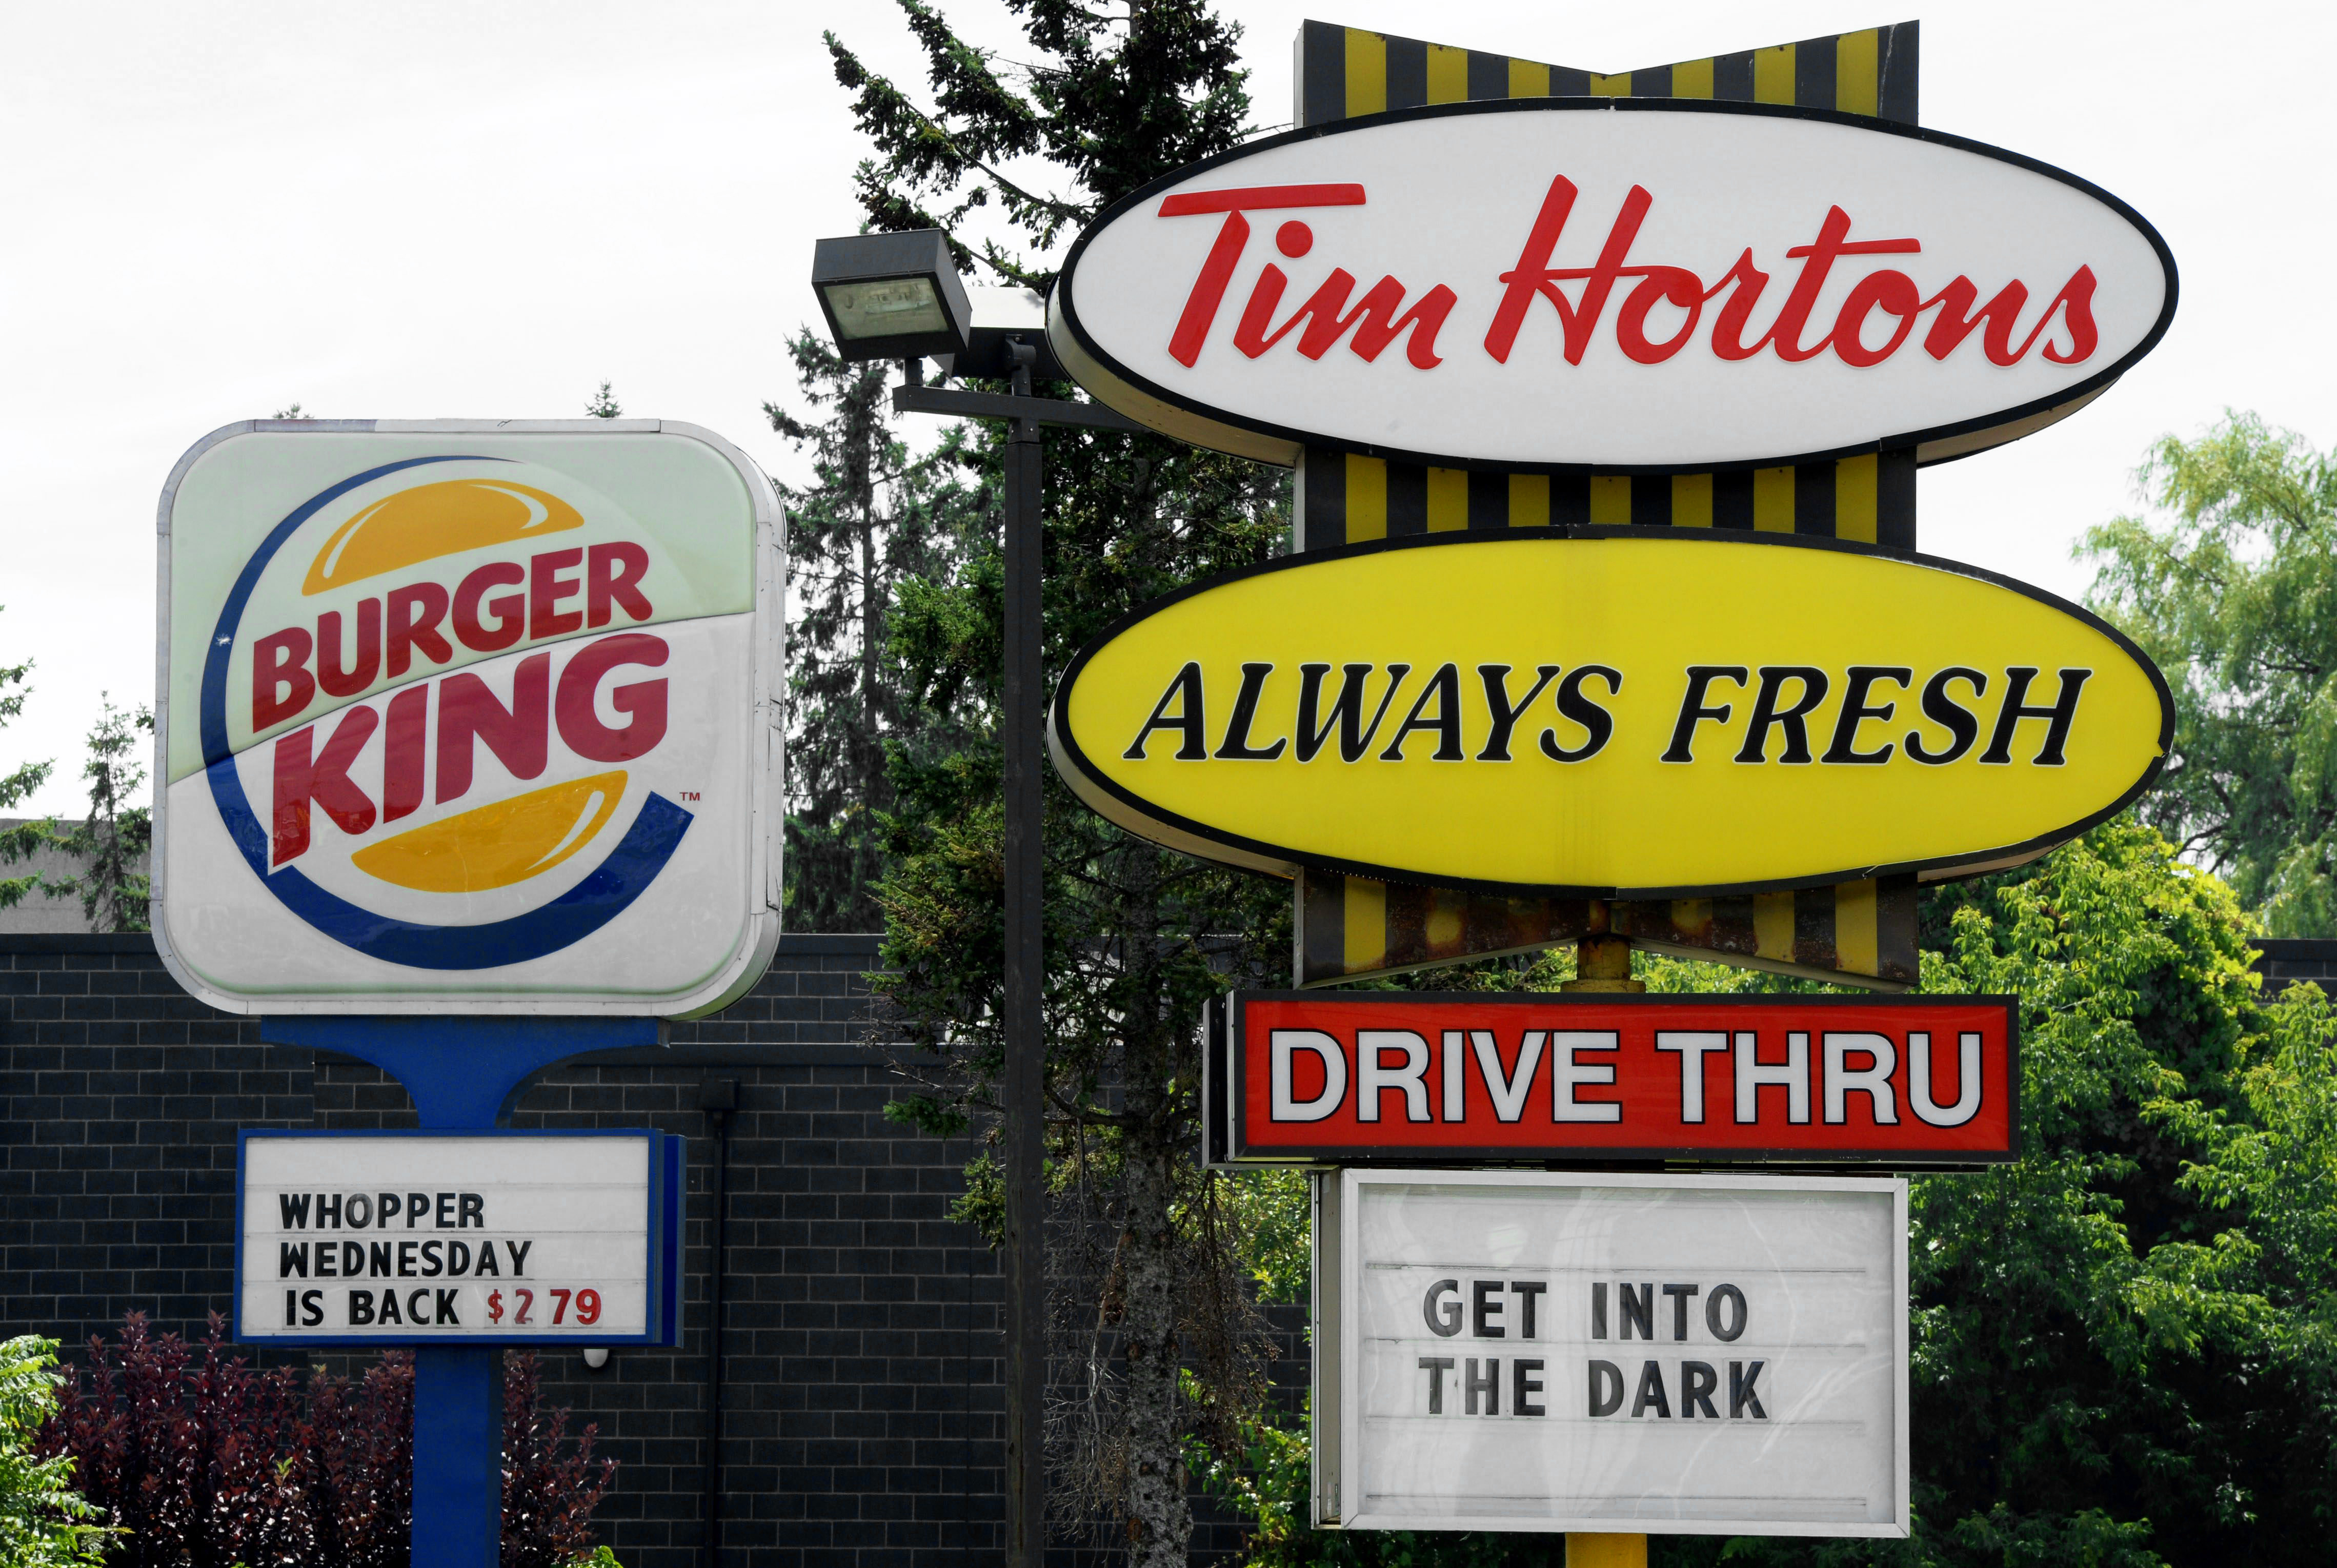 A Burger King sign and a Tim Hortons sign are displayed on St. Laurent Boulevard in Ottawa, Canada on Aug. 25, 2014. (Sean Kilpatrick—AP)